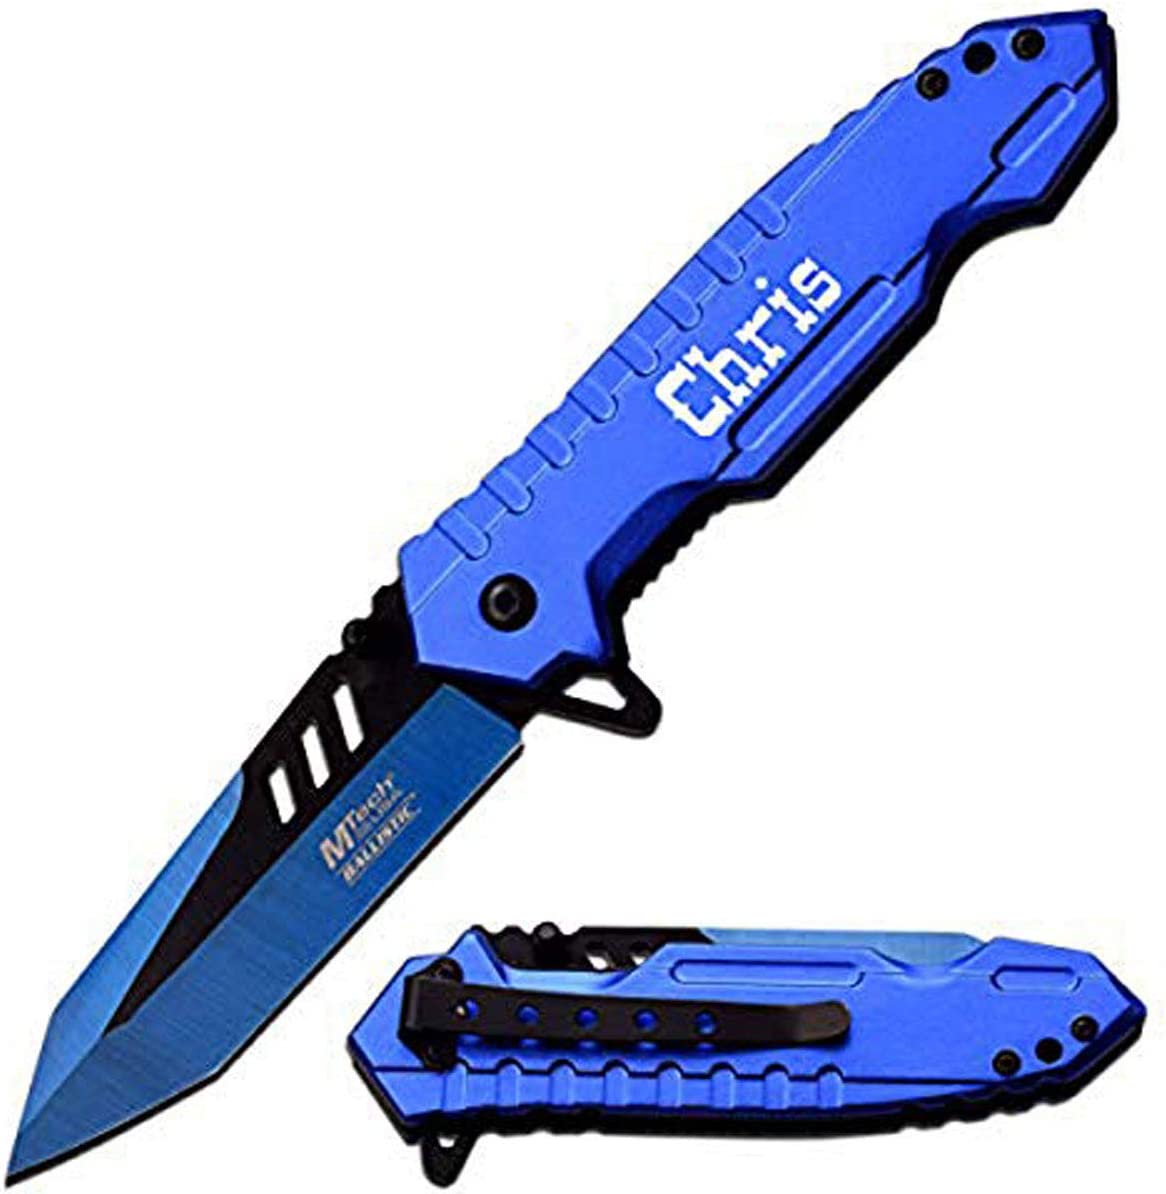 MTECH USA – Personalized Knife Pocket Knife with Free Engraving - MT-A927SL, Pack 1